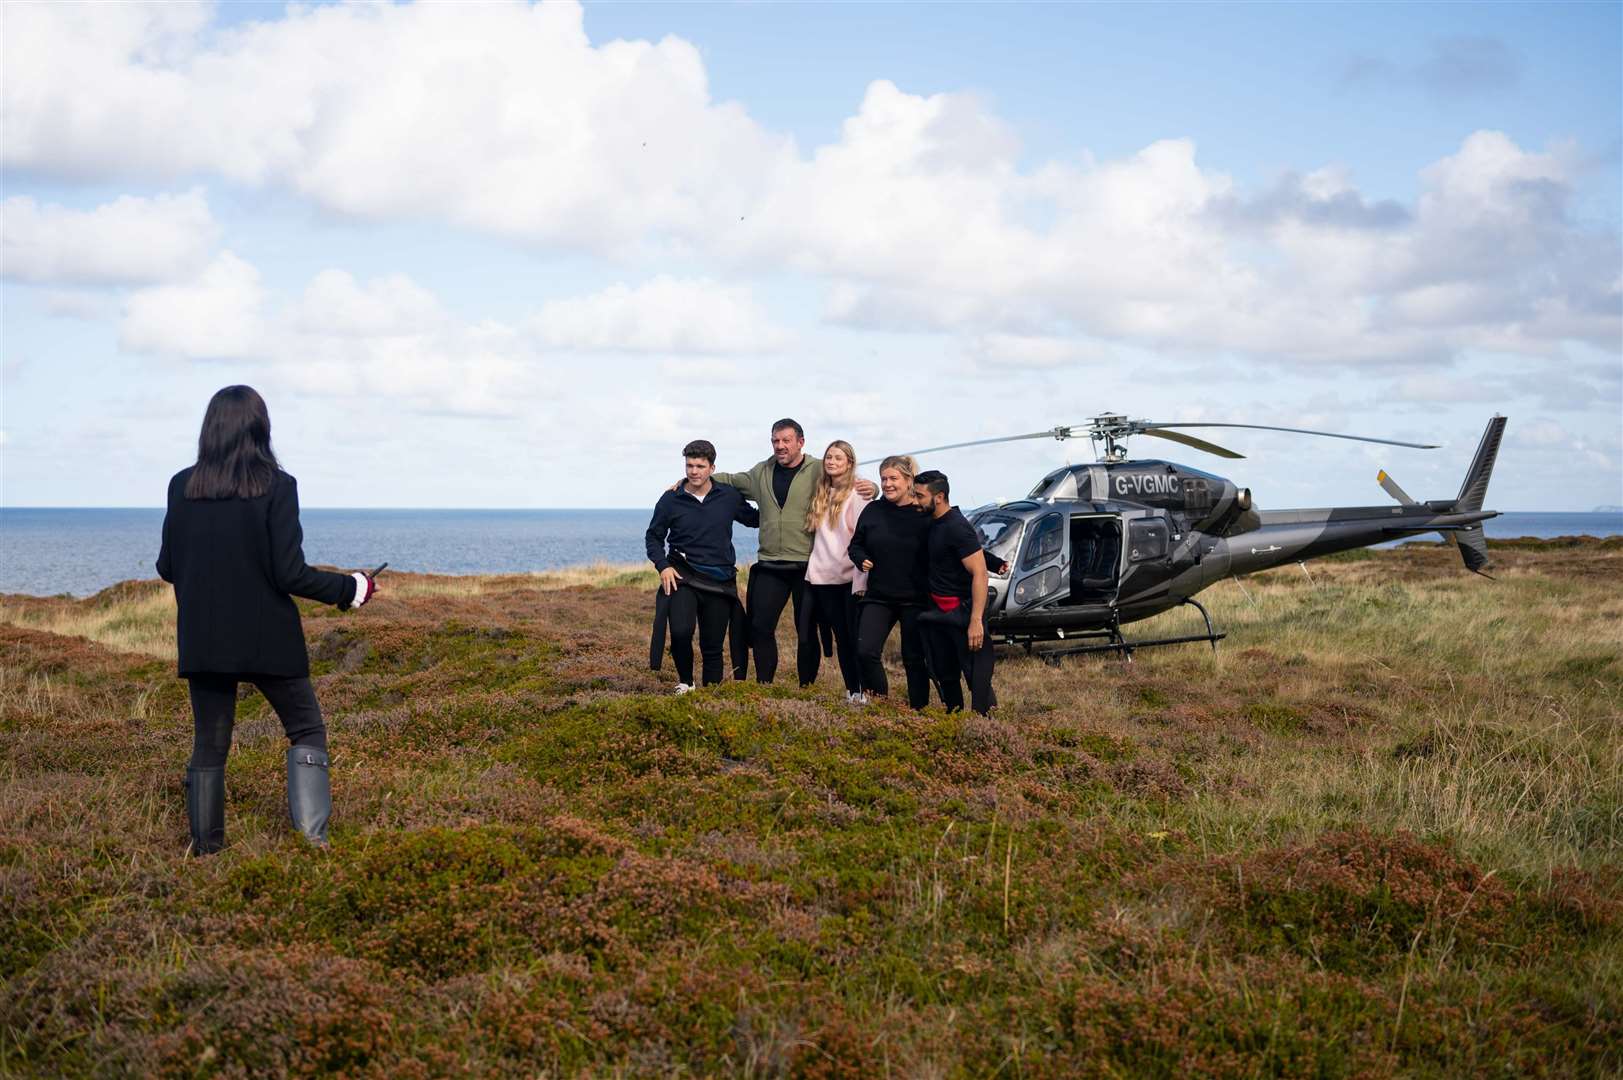 The contestants were flown in a helicopter from the traitor's castle in Easter Ross. Pictures: BBC/Studio Lambert/Llara Plaza